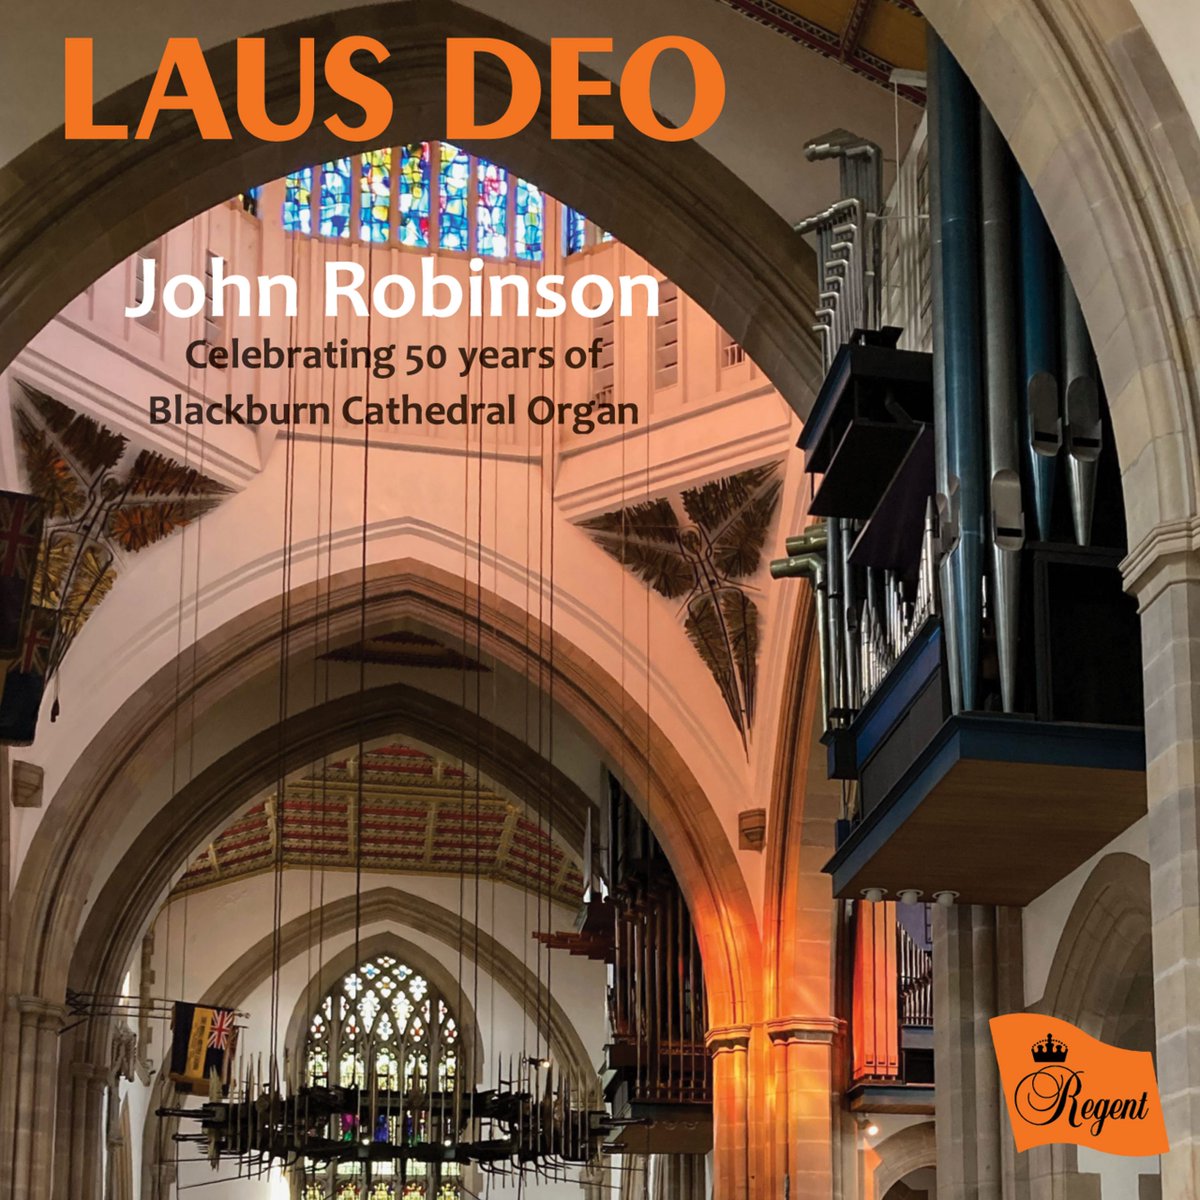 We’re celebrating! @bbcathedral @cofelancs @engcathedrals Our world-renowned organ is 50 years old. What better way to celebrate than with a new CD - 68 minutes of pure gold! Available in Checks & Grey @ChecksandGreys for just £10 a real bargain!